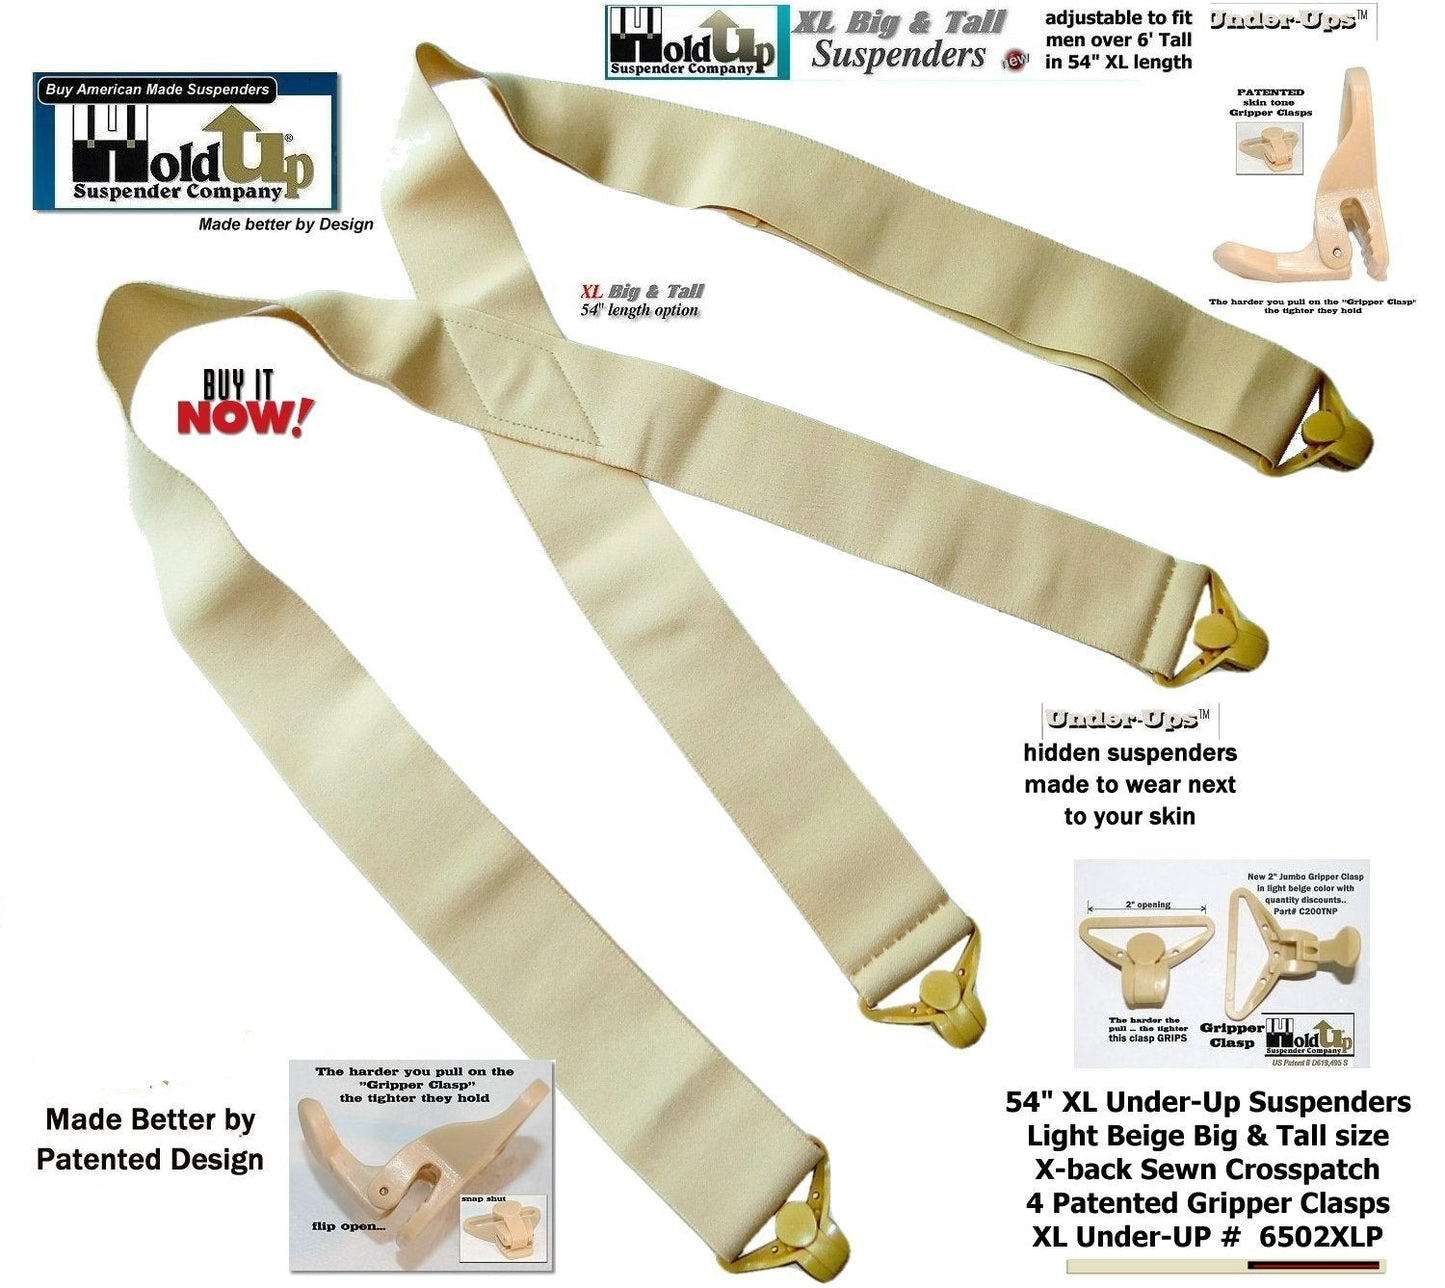 Hold-Ups 2" wide Undergarment XL Suspenders in X-back style with USA Patented Gripper Clasps